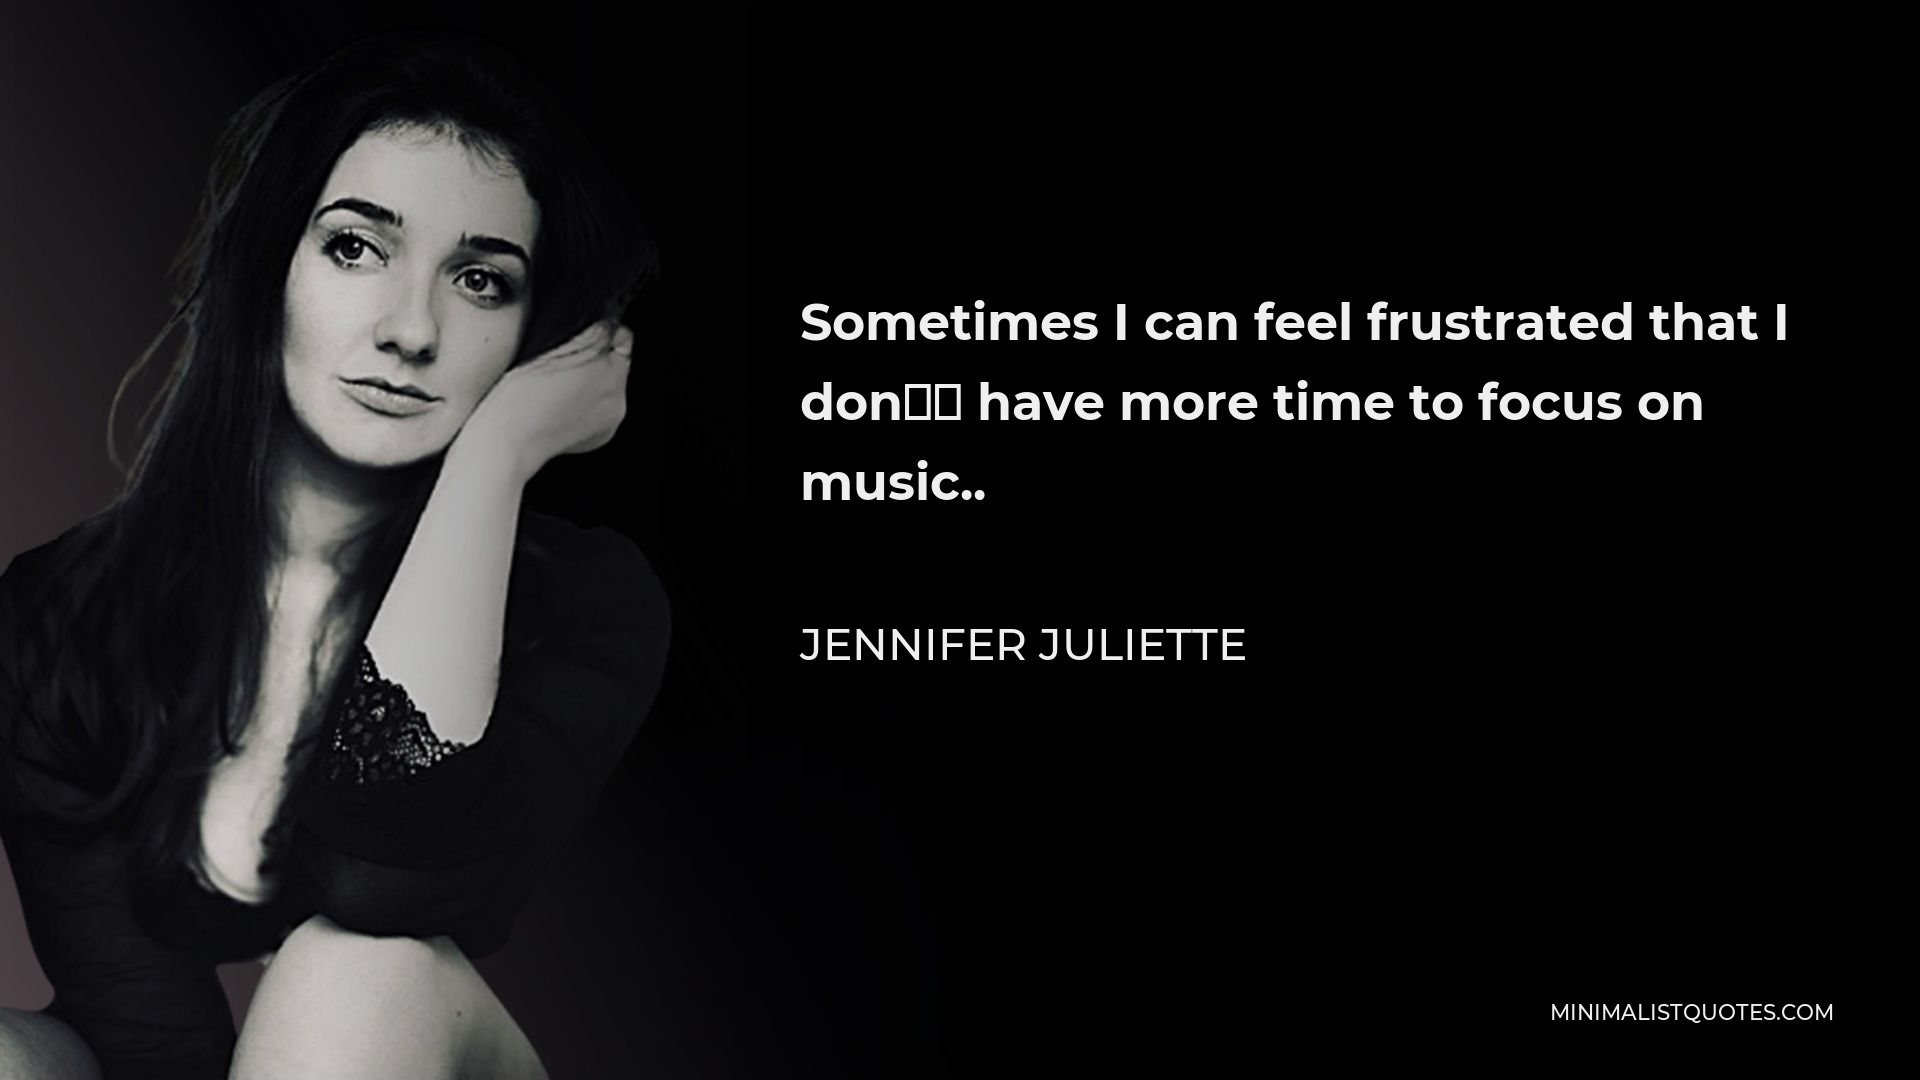 Jennifer Juliette Quote - Sometimes I can feel frustrated that I don’t have more time to focus on music..